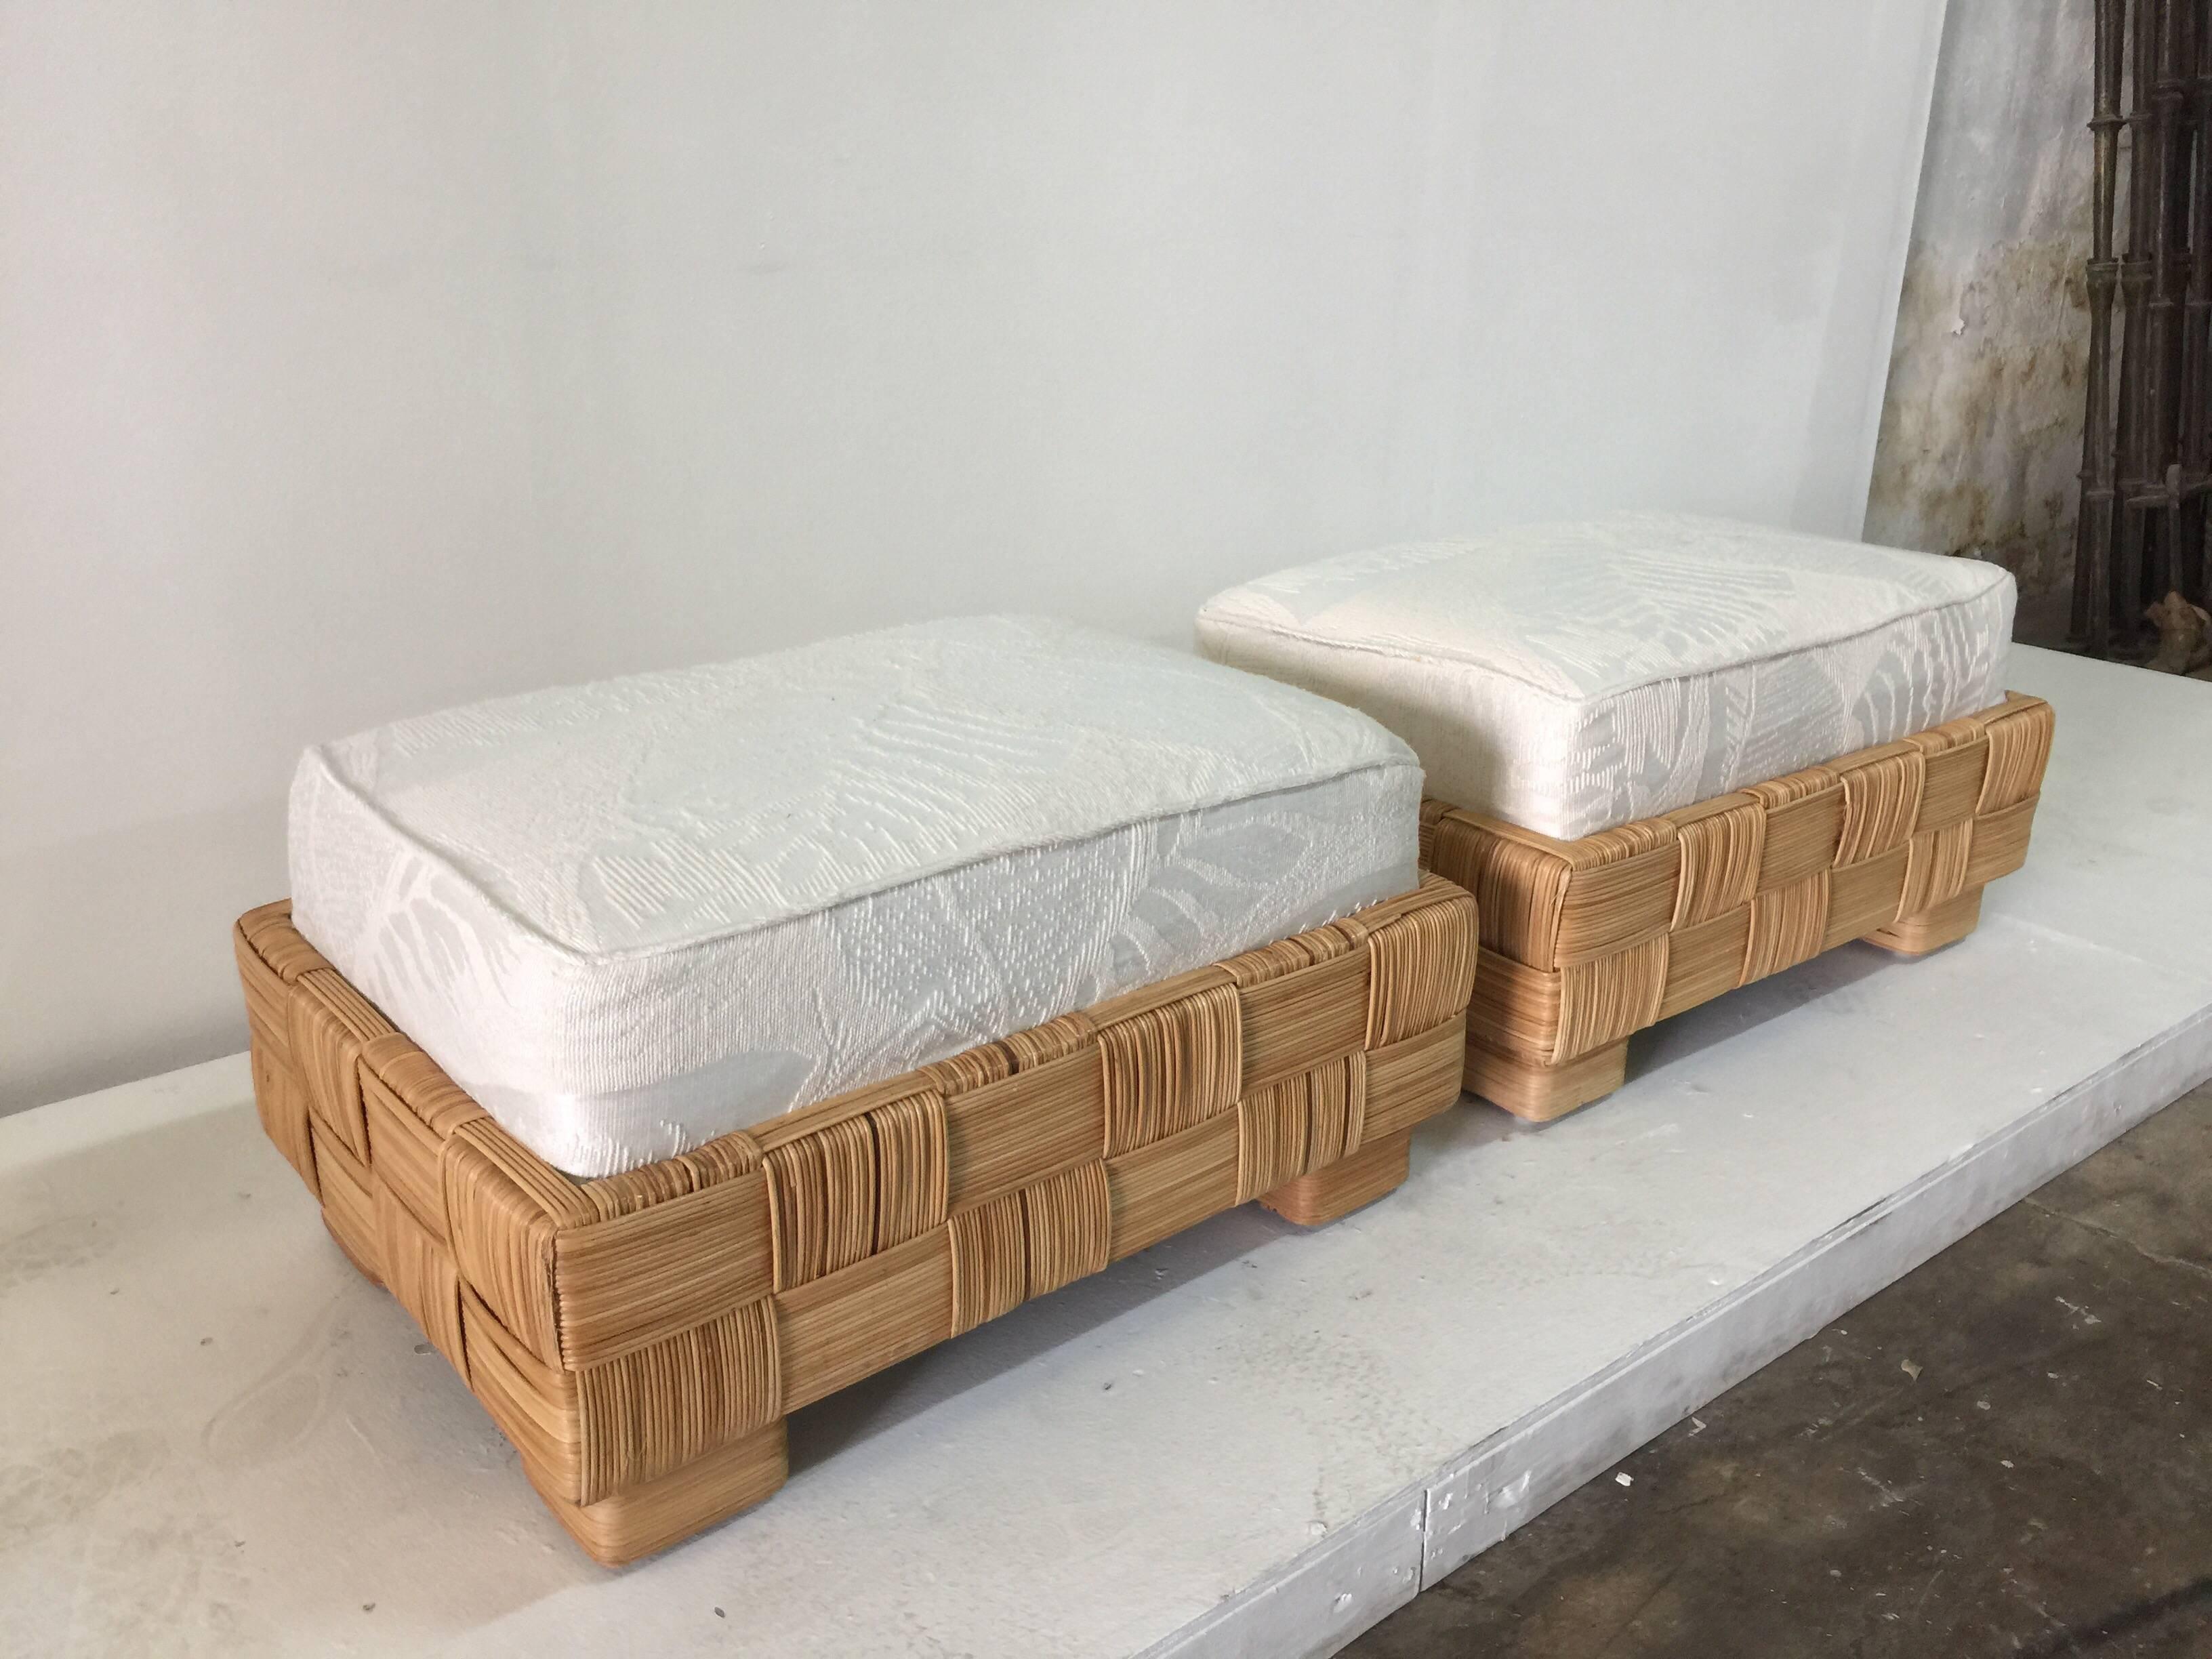 Wonderful designed, these Island inspired wicker ottomans by John Hutton, are heavy and well constructed. Large sofa and armchair also available (same set).